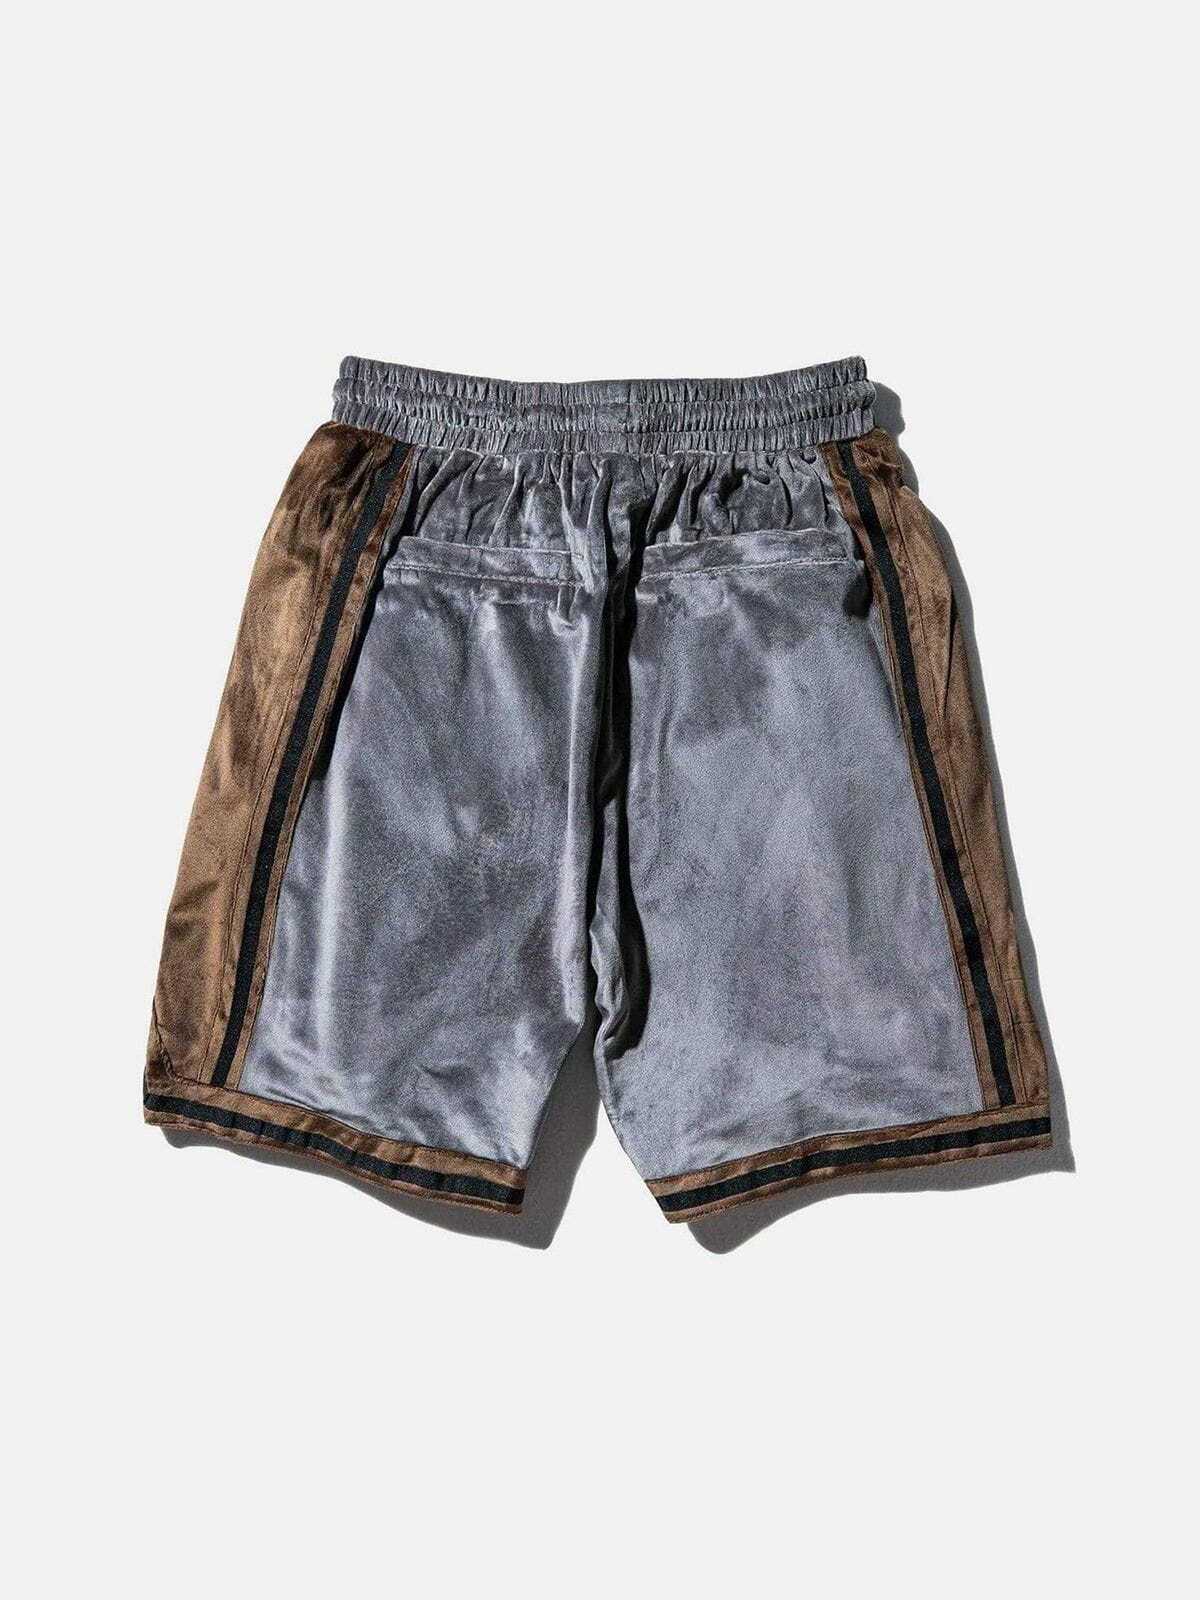 retroinspired suede shorts edgy  vibrant streetwear essential 8840